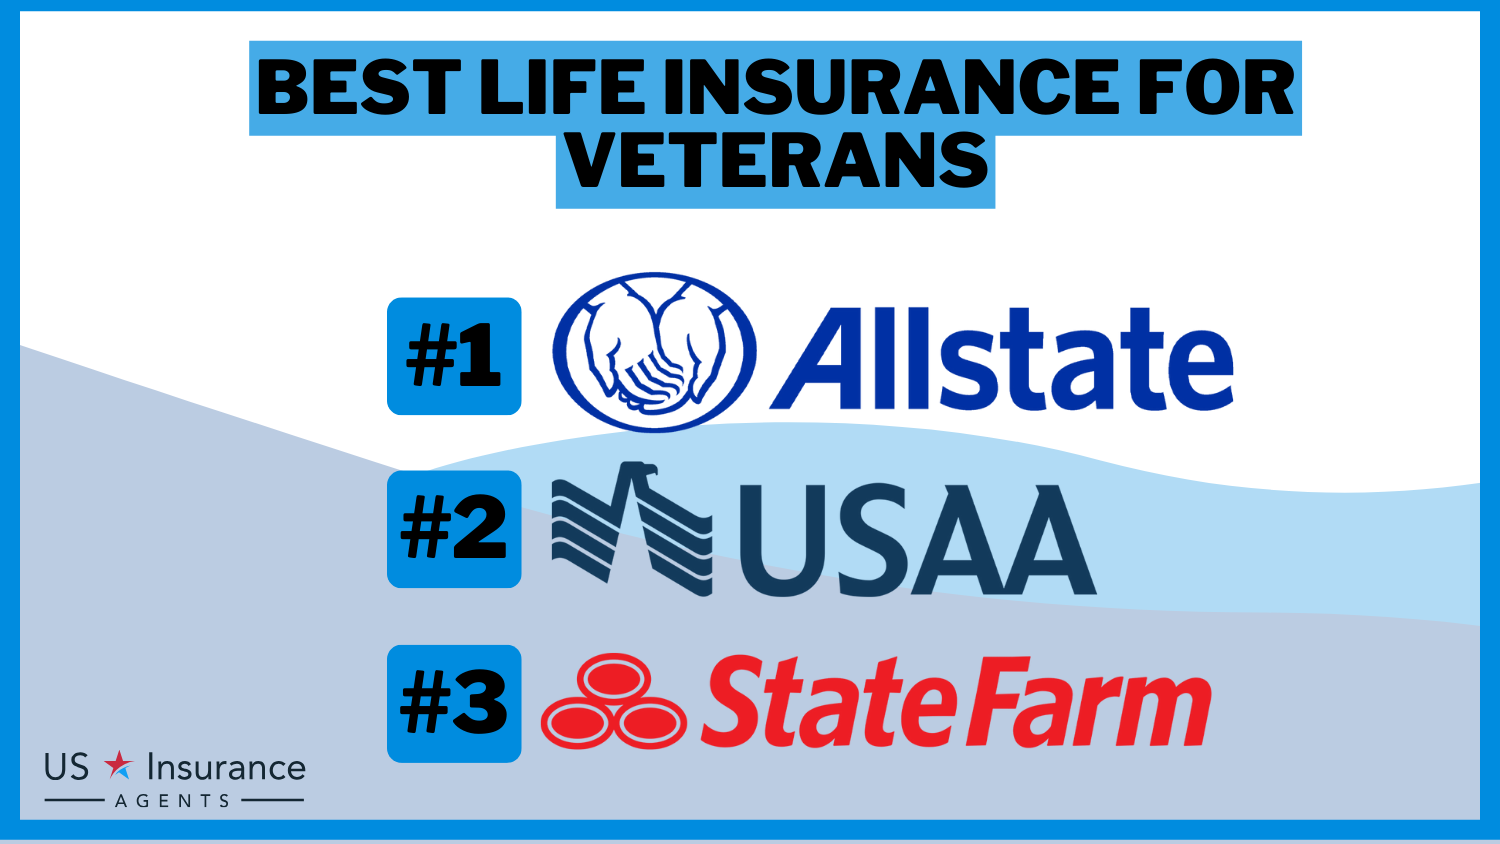 Best Life Insurance for Veterans: Allstate, USAA, and State Farm